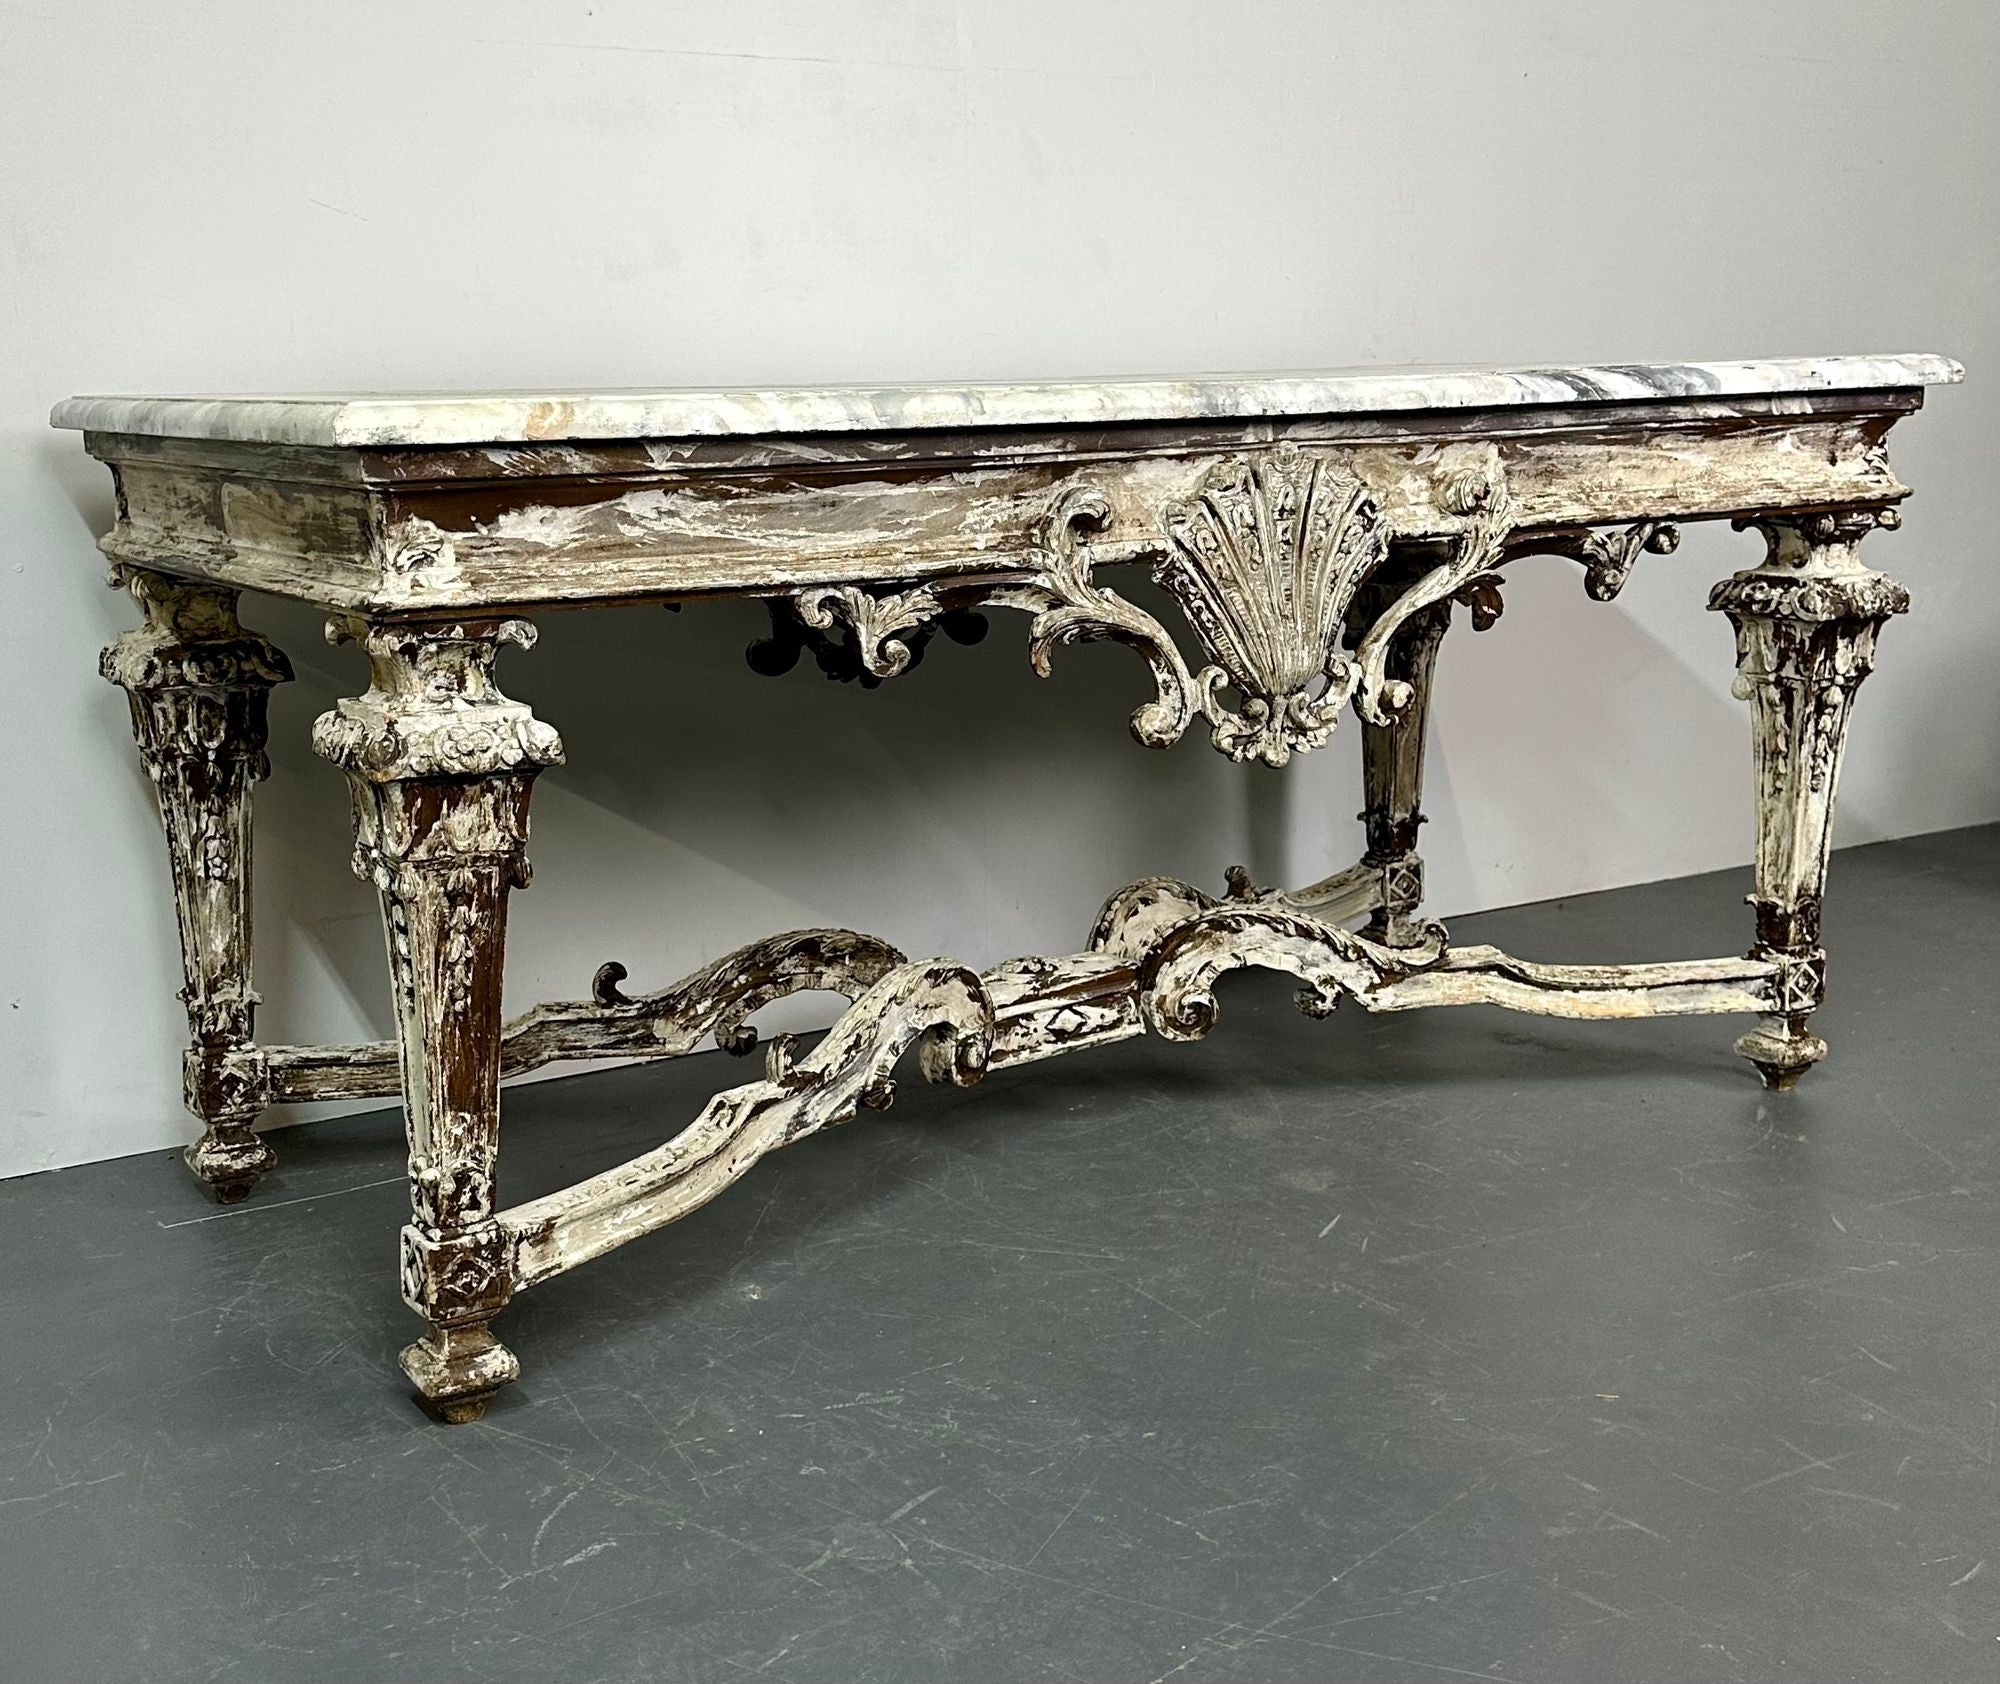 Italian Faux Marble Top Centre or Dining Table, Gustavian, Painted
A stunning painted dining or center, vestibule table in a finely painted finish having a faux white and gray veined table top supported by a shocking carved table base depicting